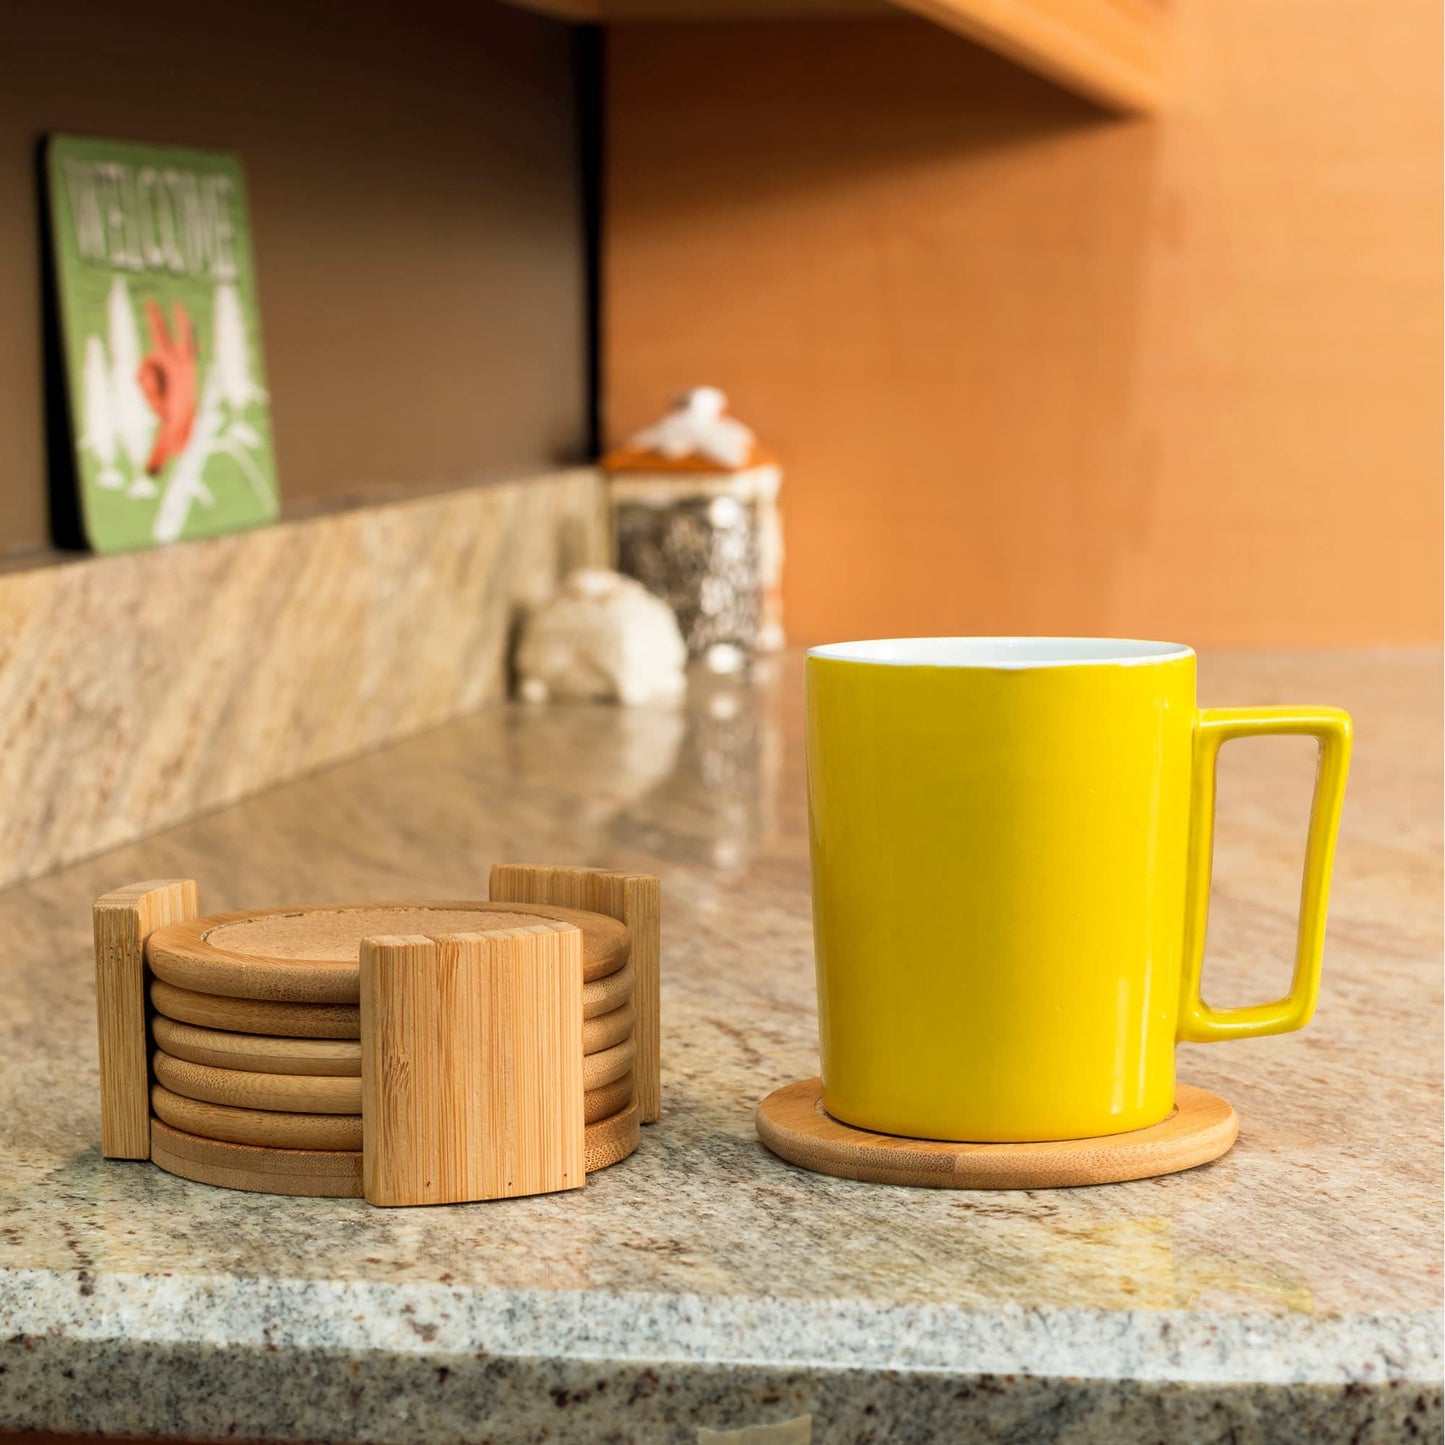 4.5" Bamboo Coaster Set, (Pack of 6) with Holder, Natural